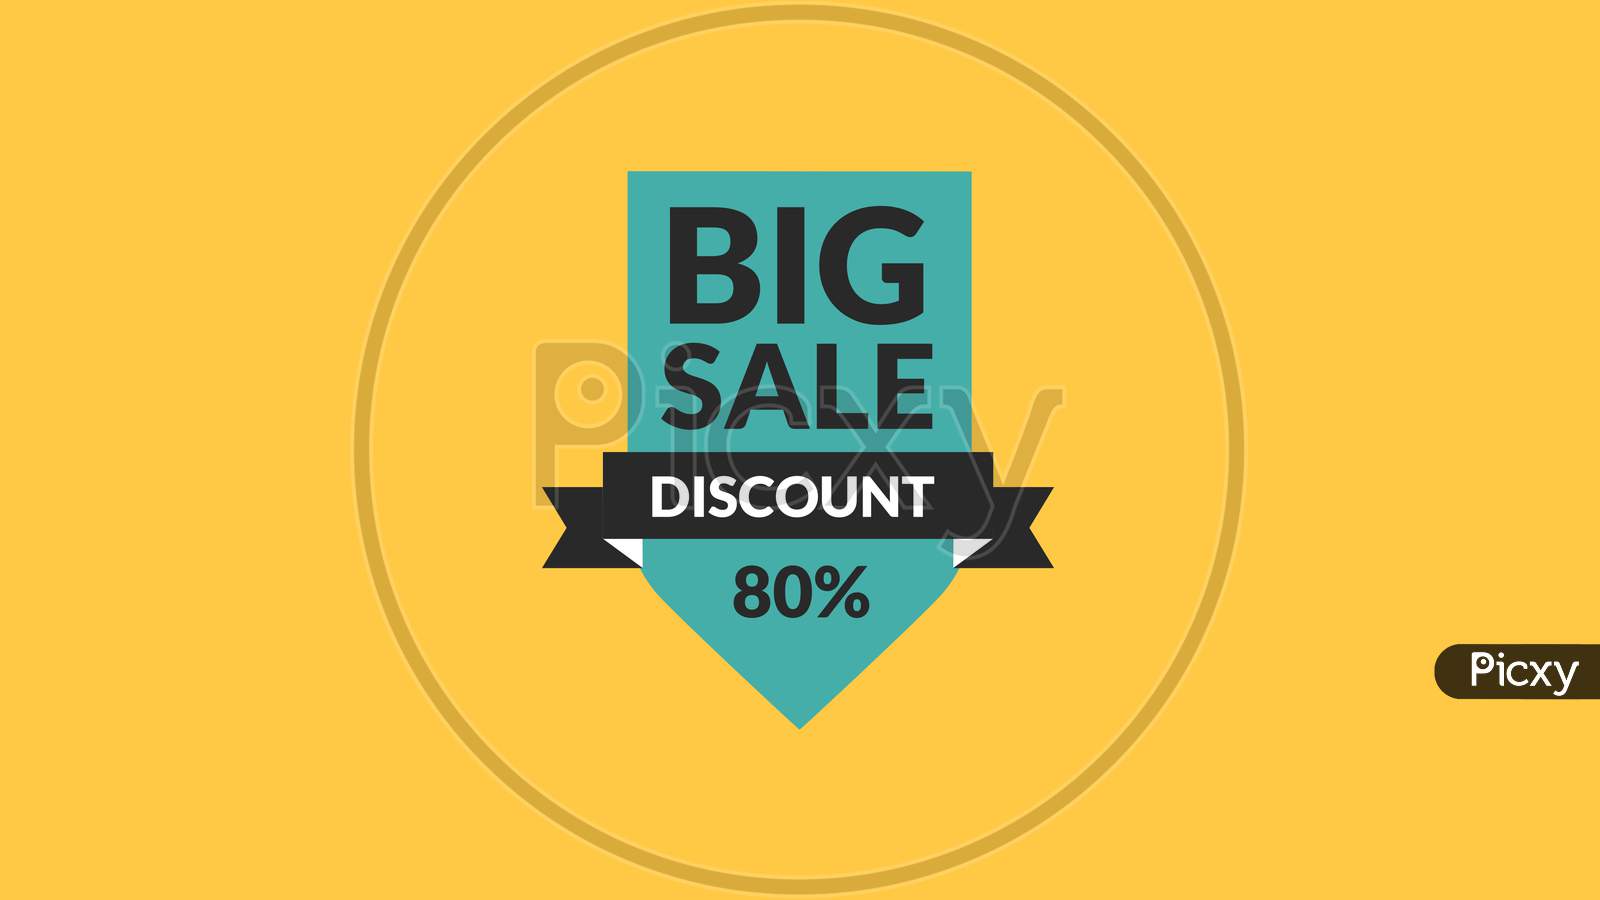 Big Sale Discount 80% Word Illustration Use For Landing Page, Template, Ui, Web, Poster, Banner, Flyer, Background, Gift Card, Coupon, Label, Wallpaper,Sale Promotion,Advertising, Marketing